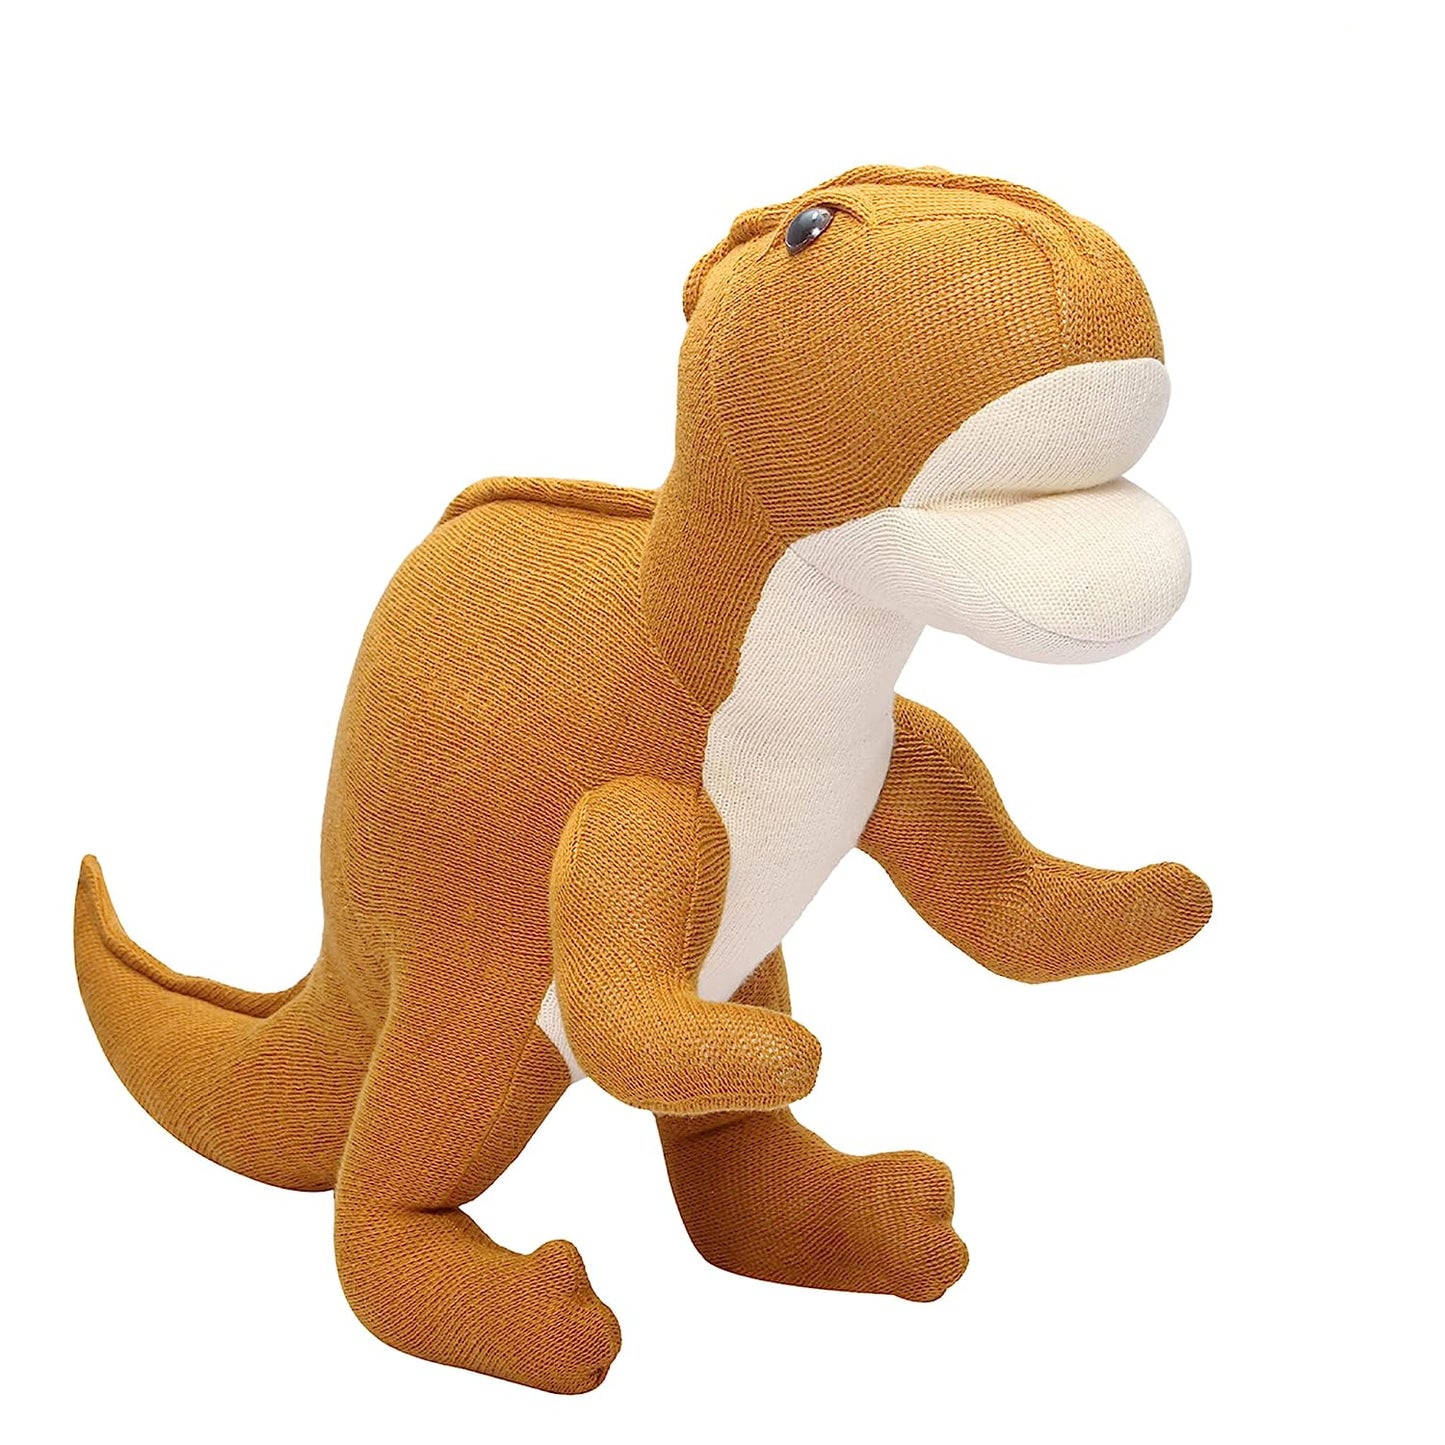 20 inches Dinosaur Plush Soft Toys for Kids (Mastered Gray)